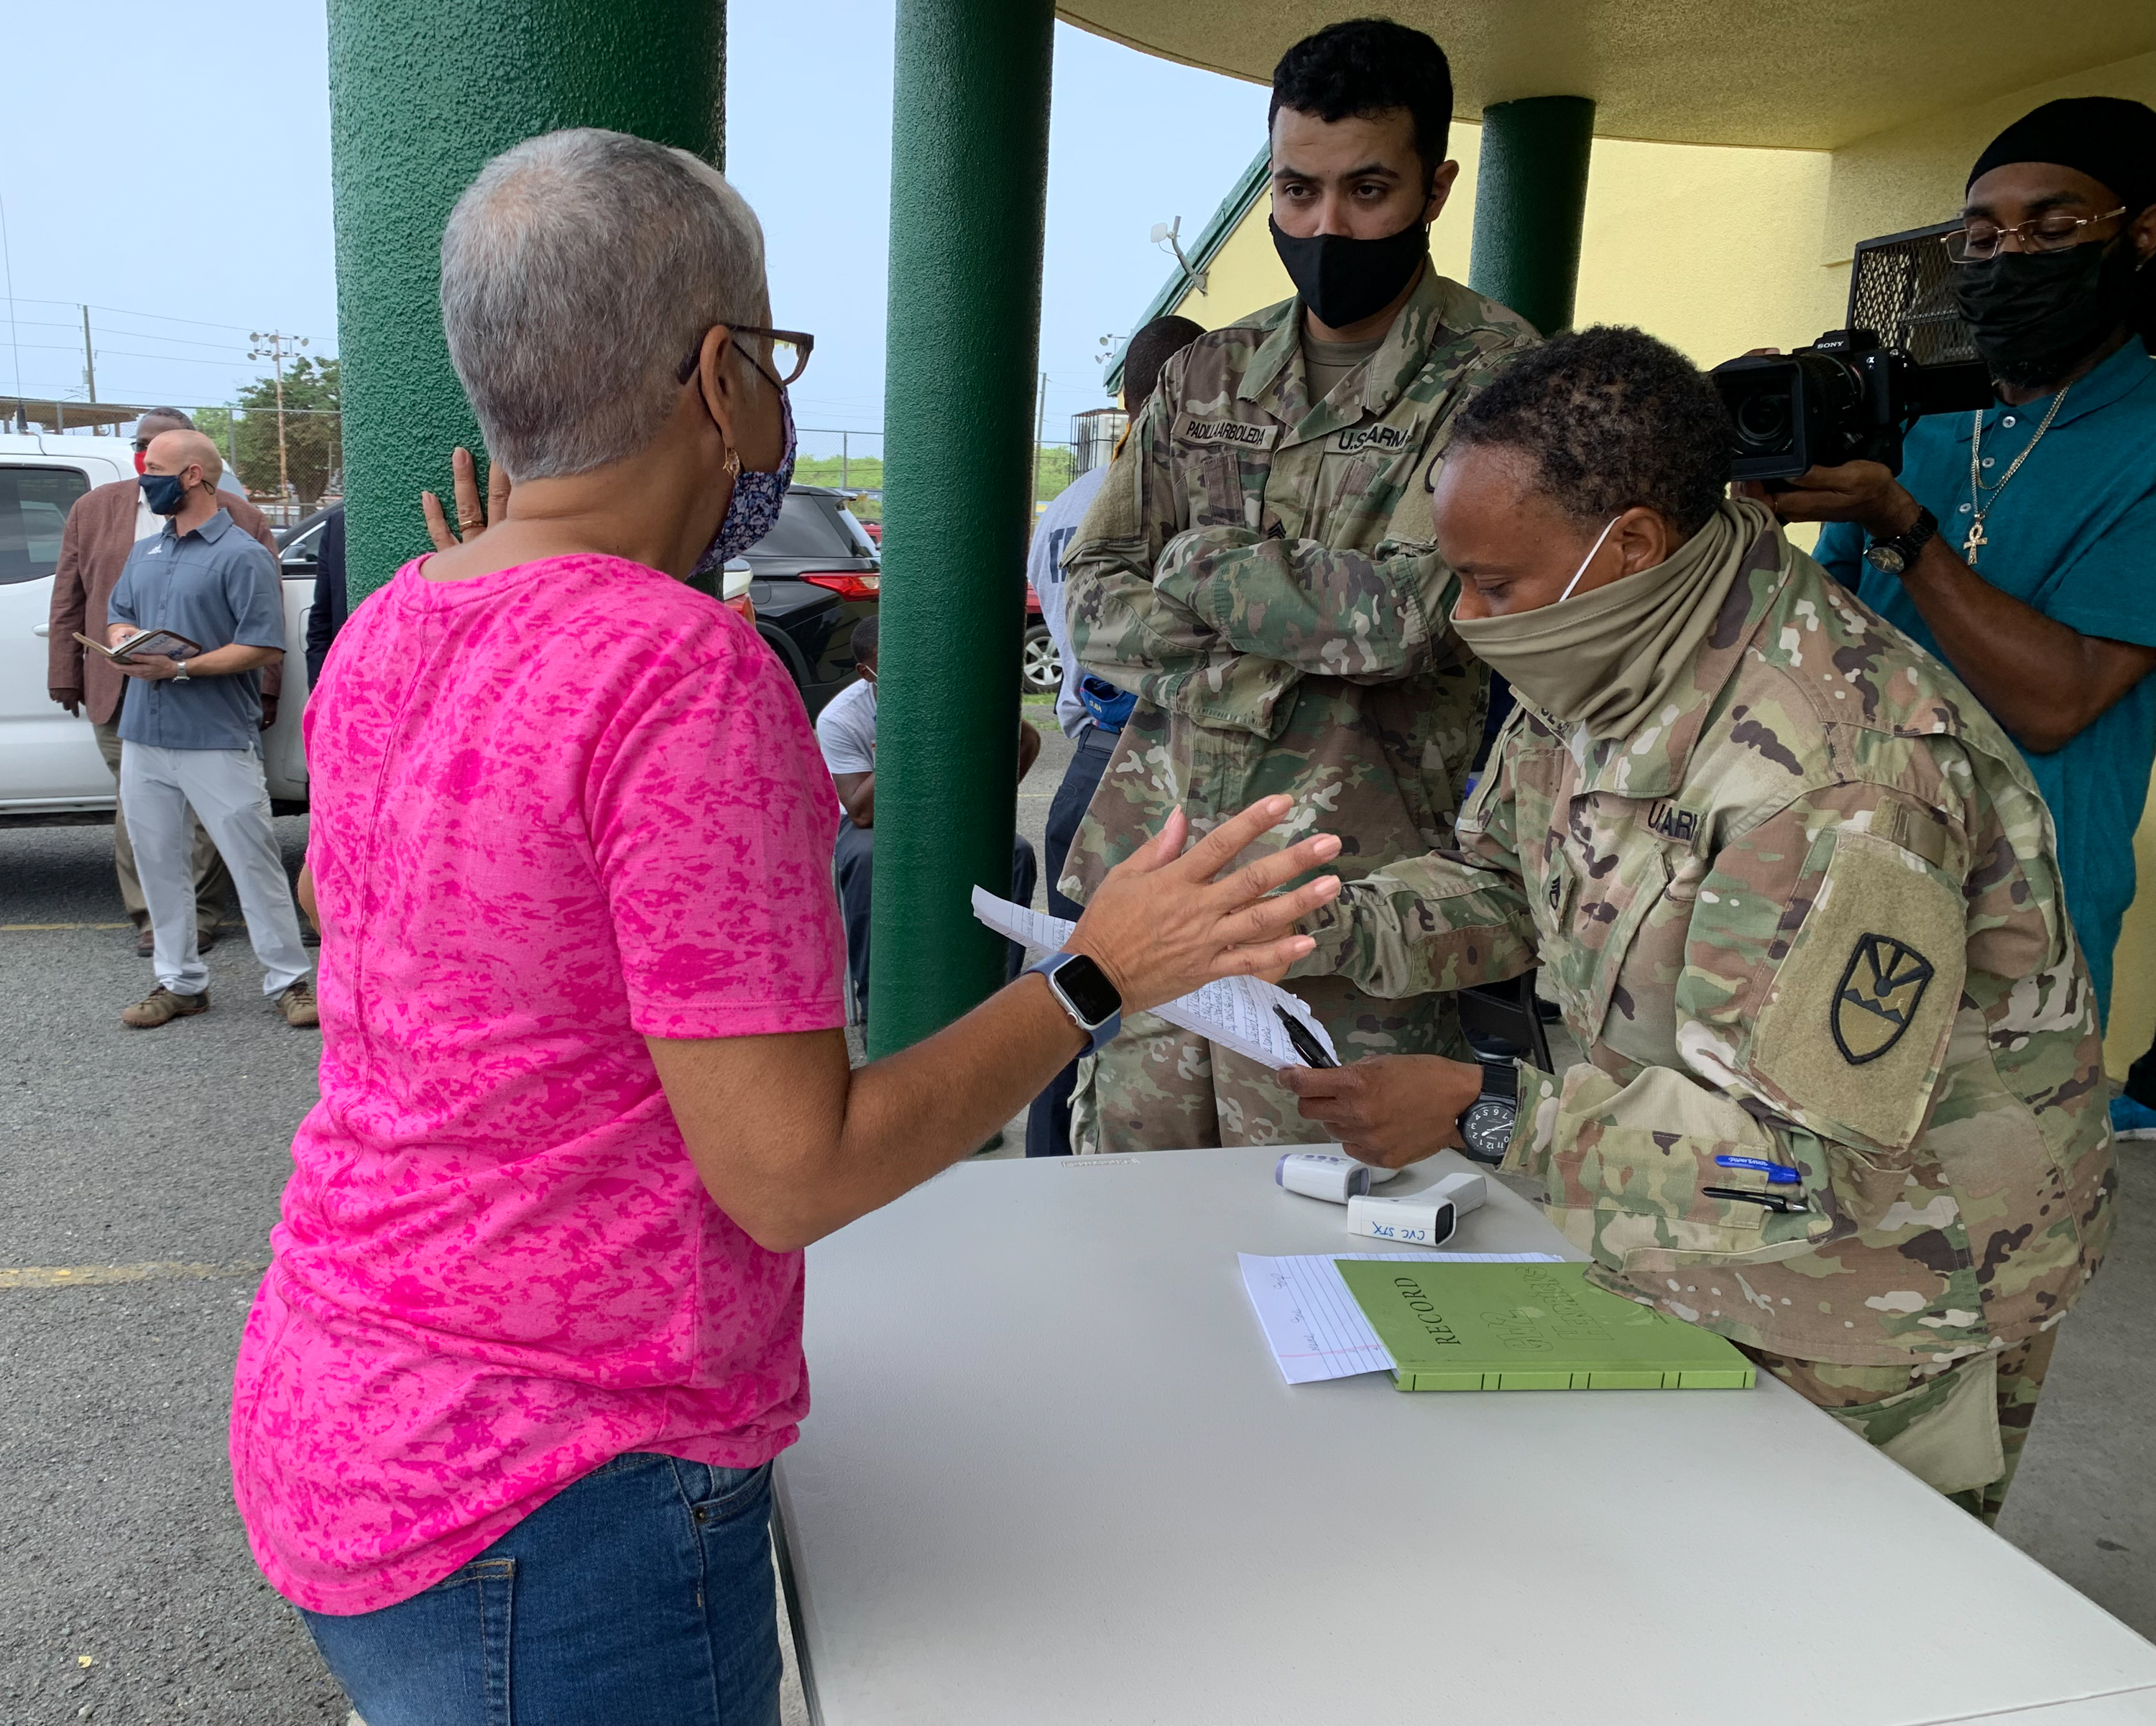 A volunteer acting as an evacuee checks in with the Virgin Islands National Guard during an evacuation shelter drill at D.C. Canegata Recreation Center on St. Croix.